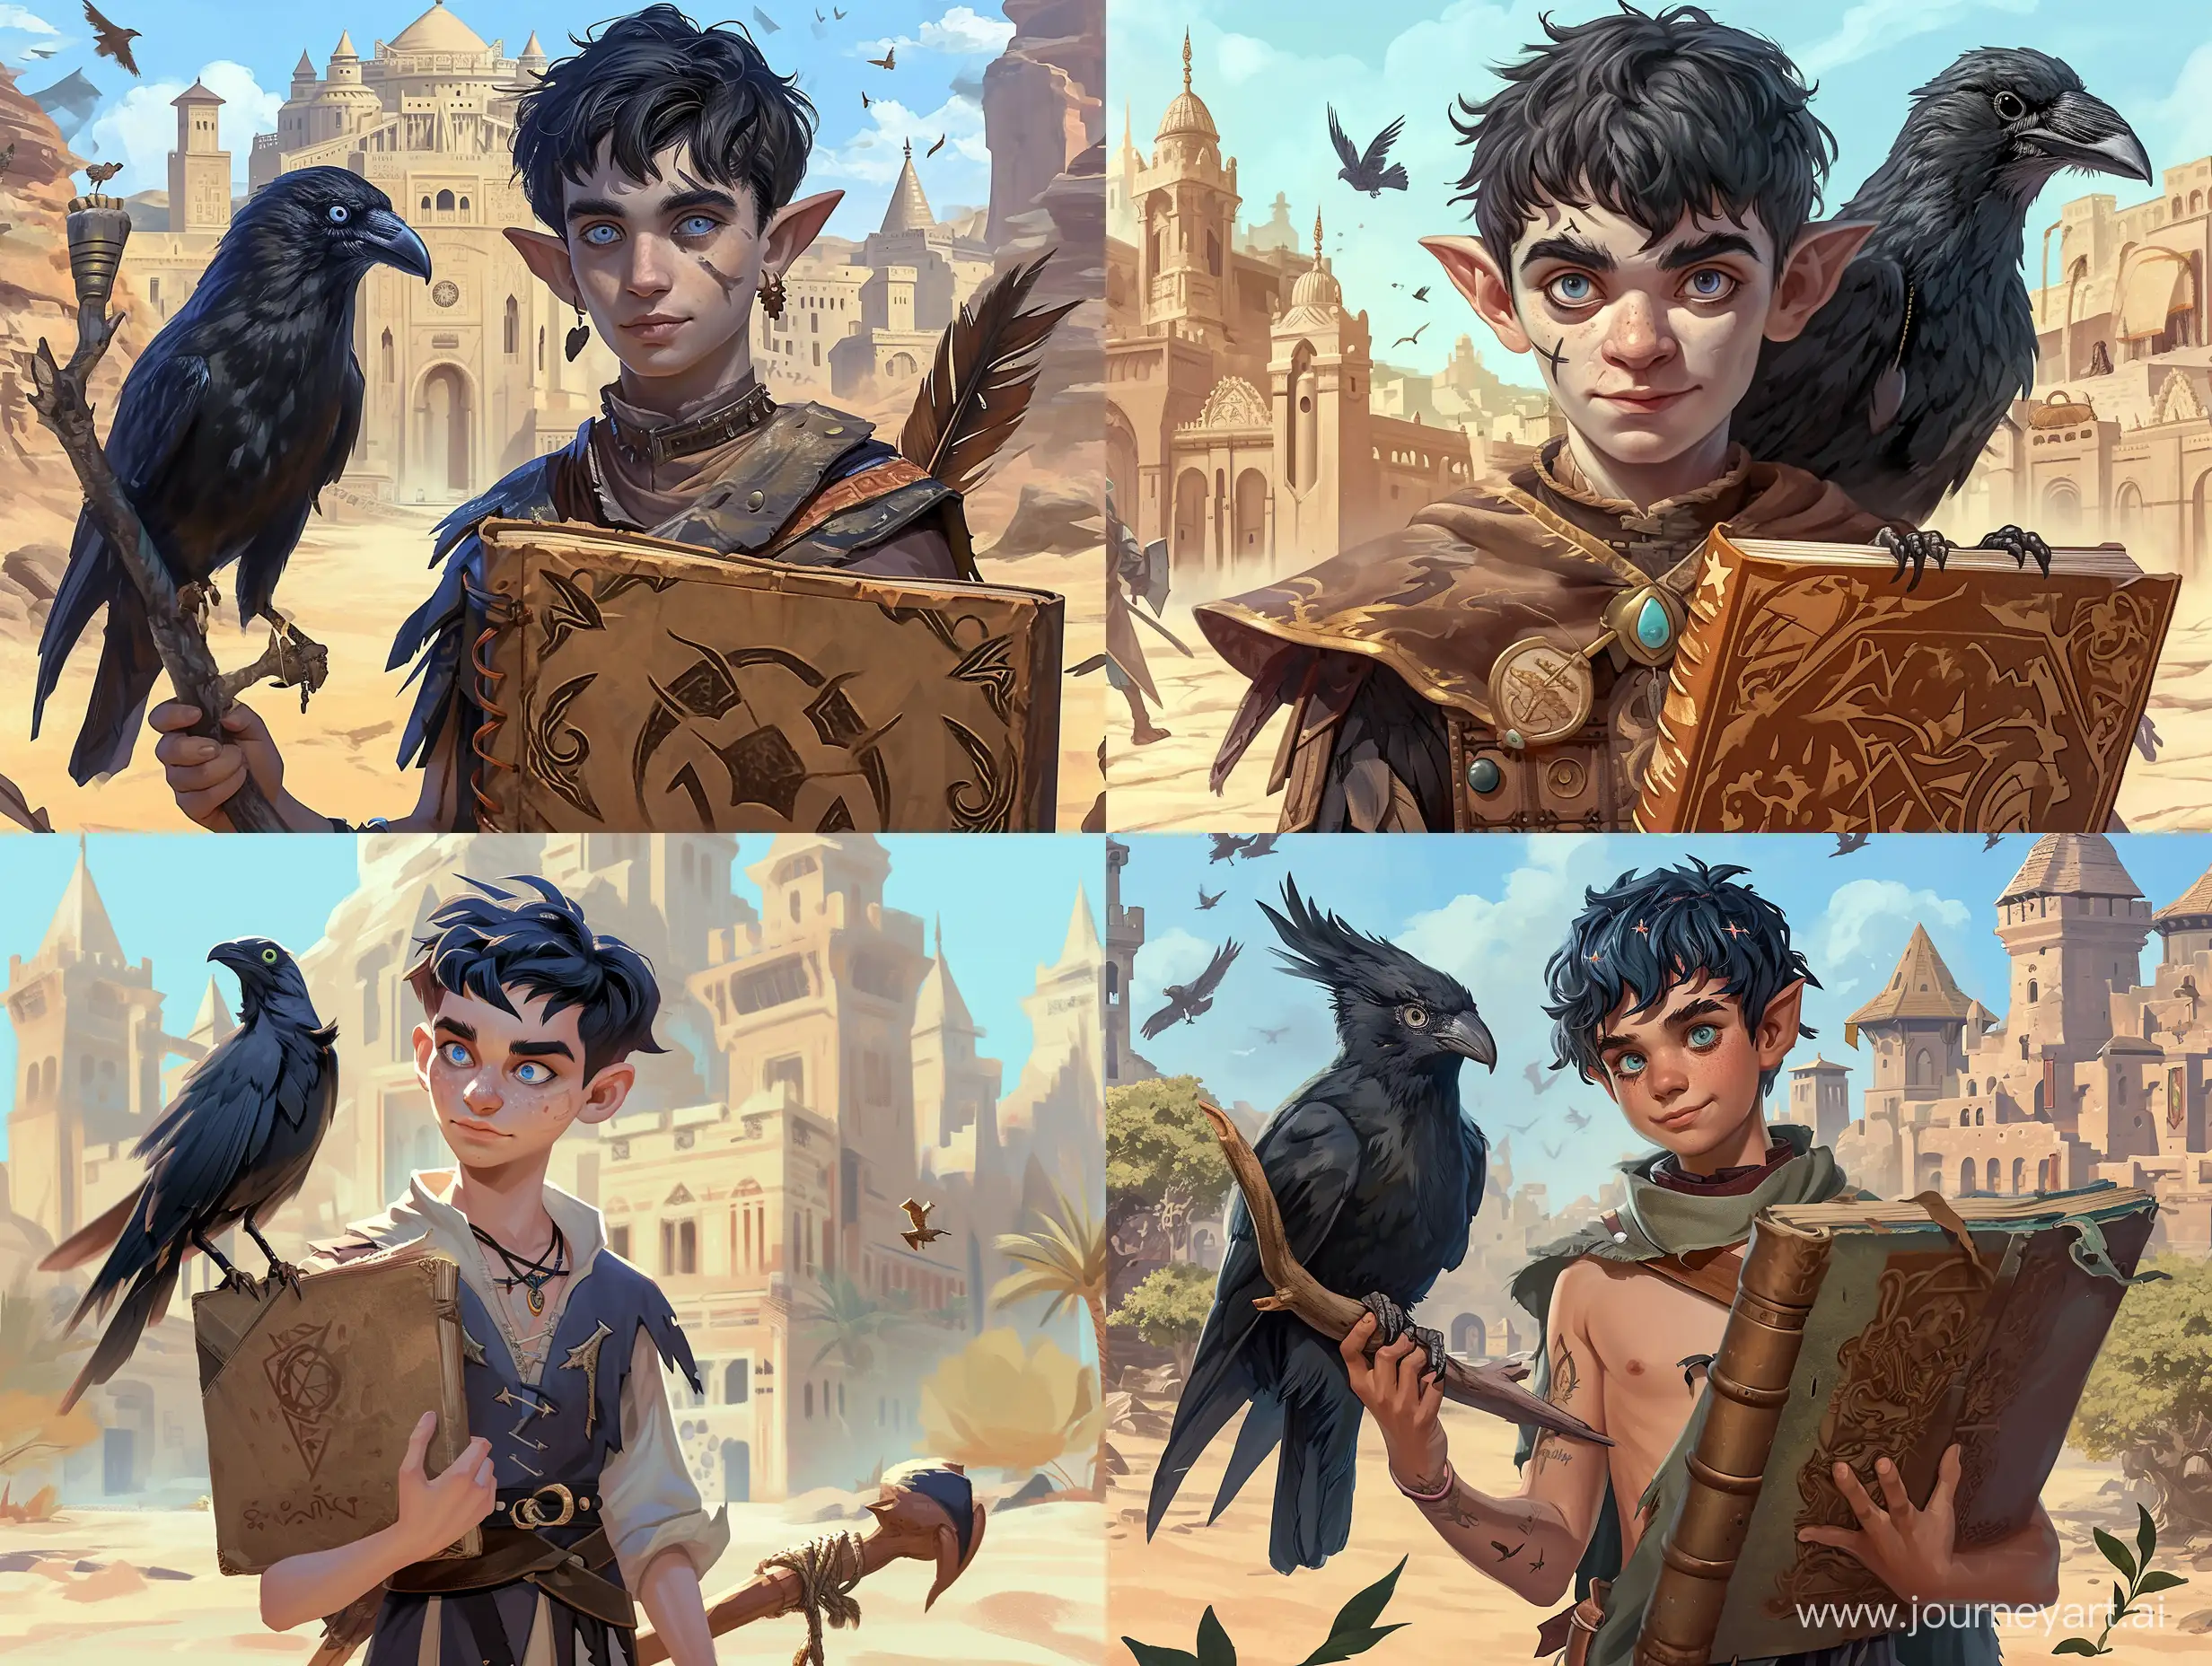 Innocent-Young-Wizard-with-Magical-Crow-and-Ancient-Spellbook-at-Desert-University